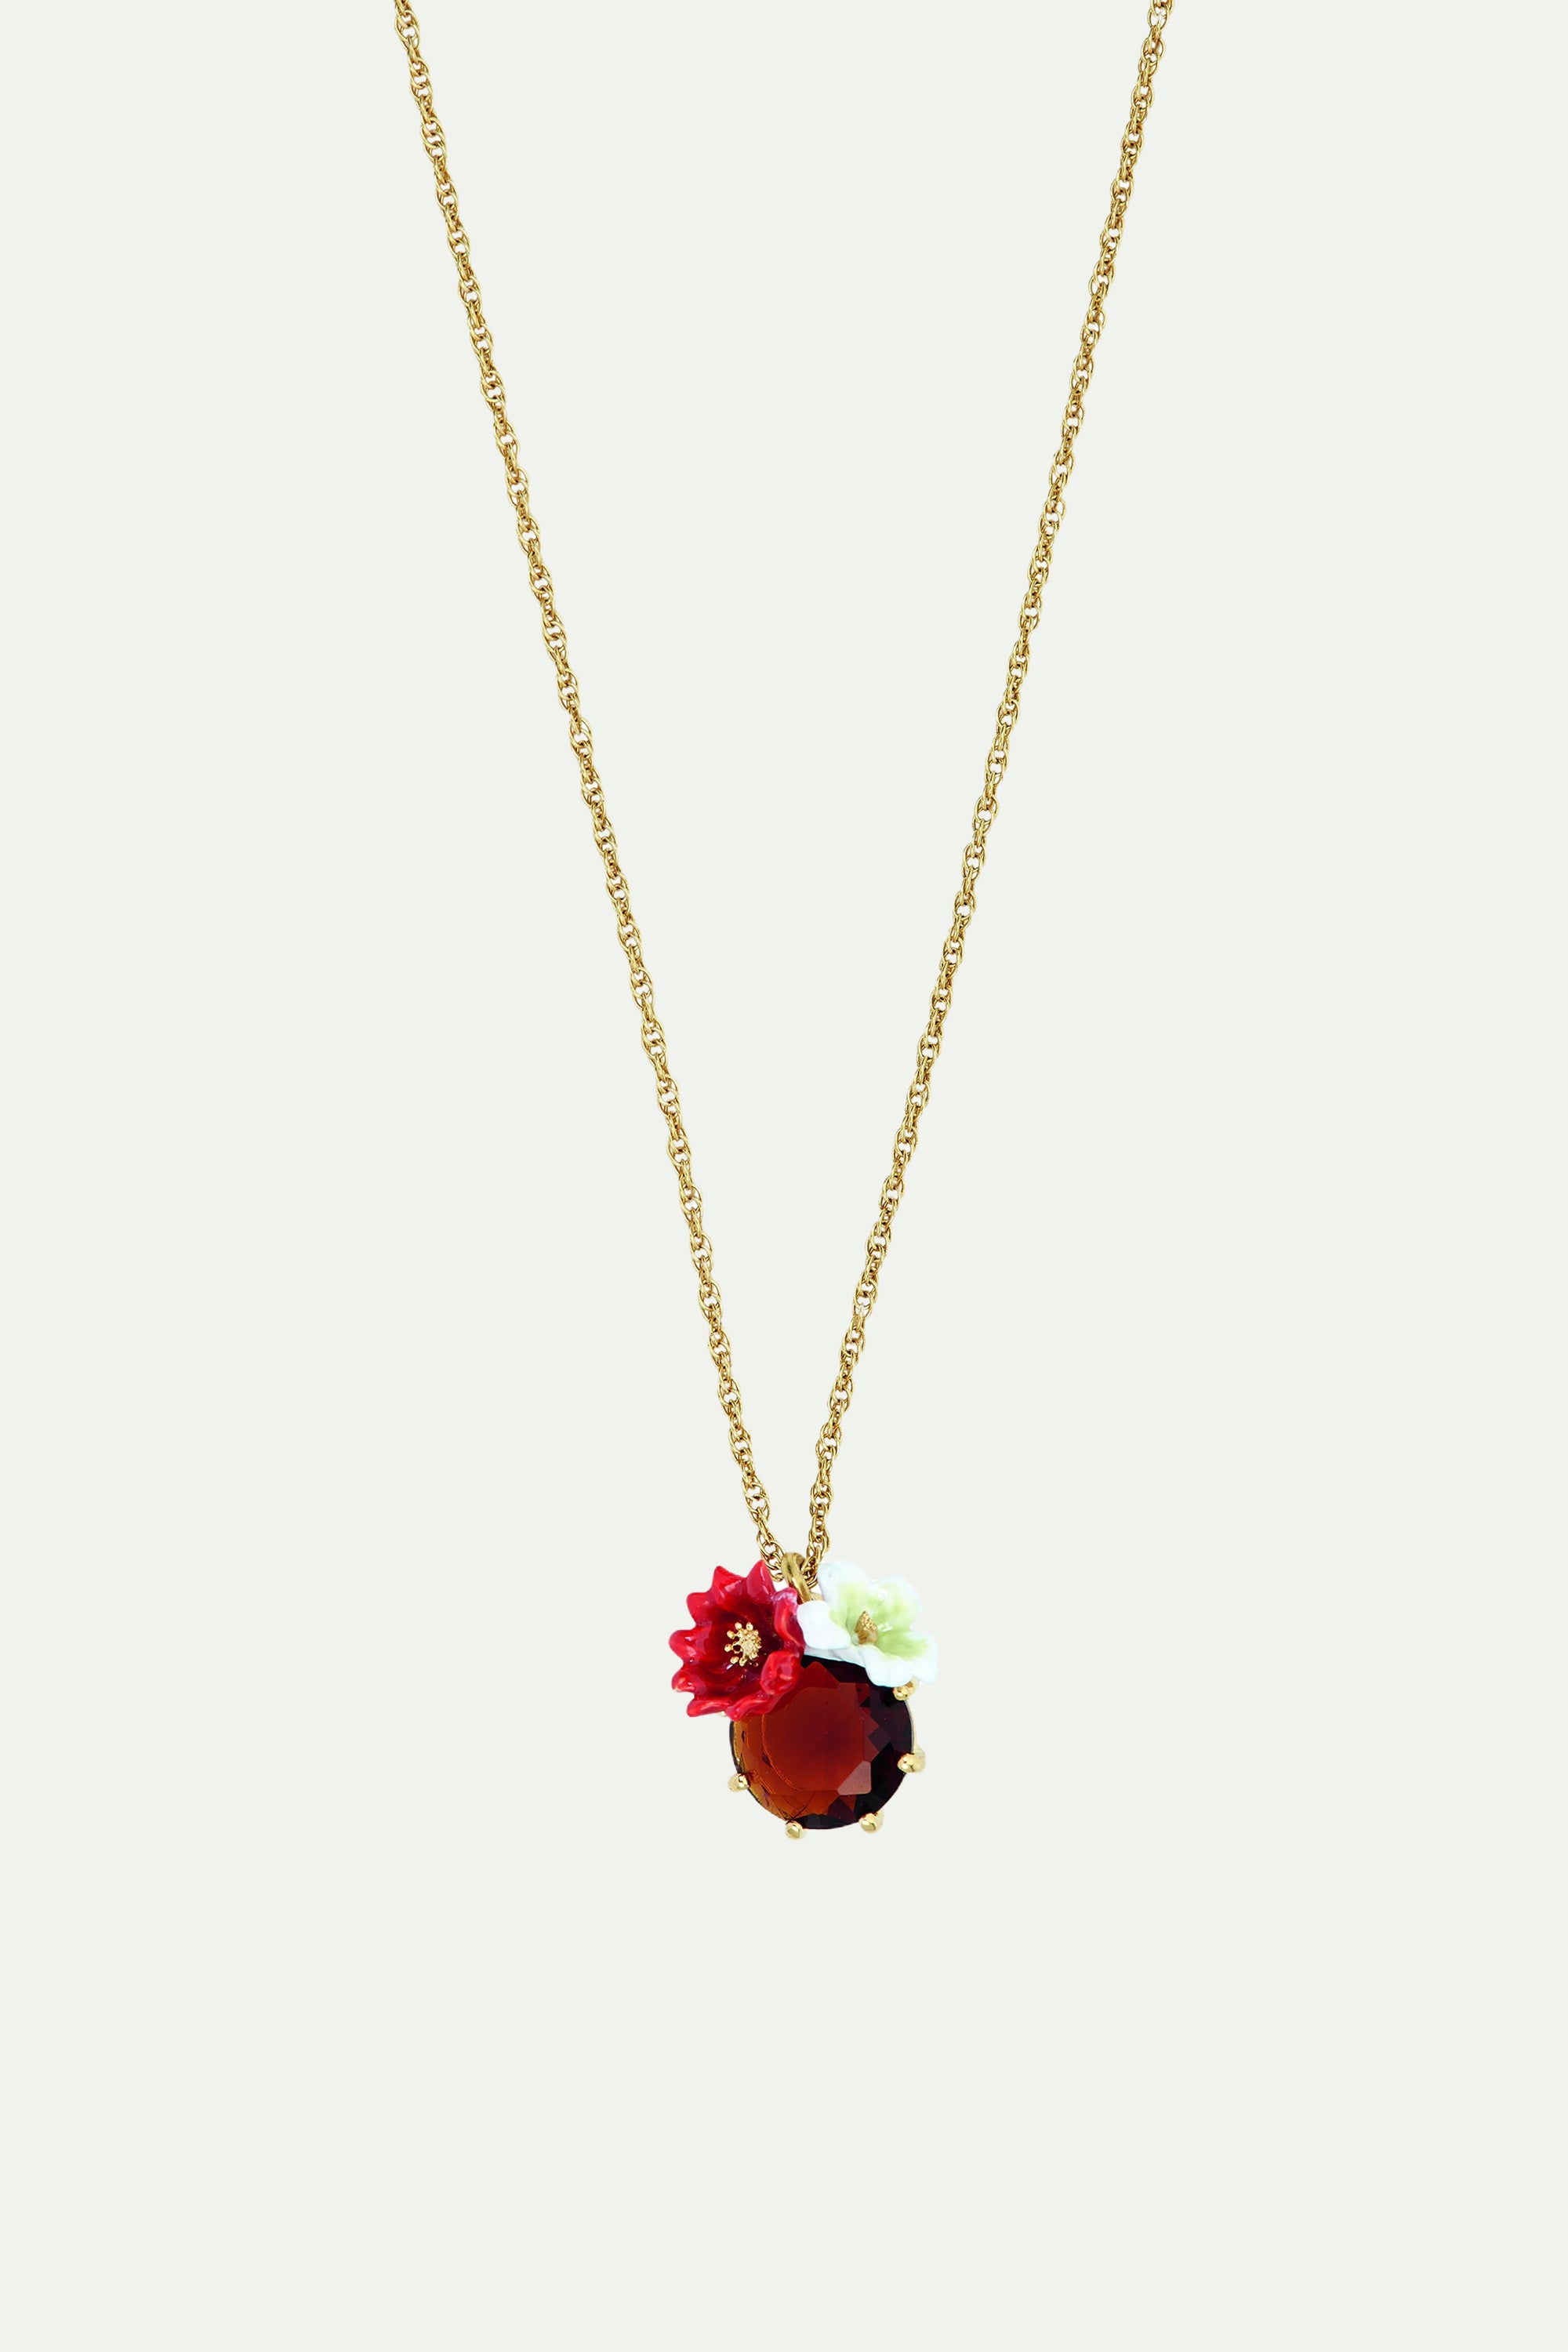 Two flowers and faceted glass pendant necklace